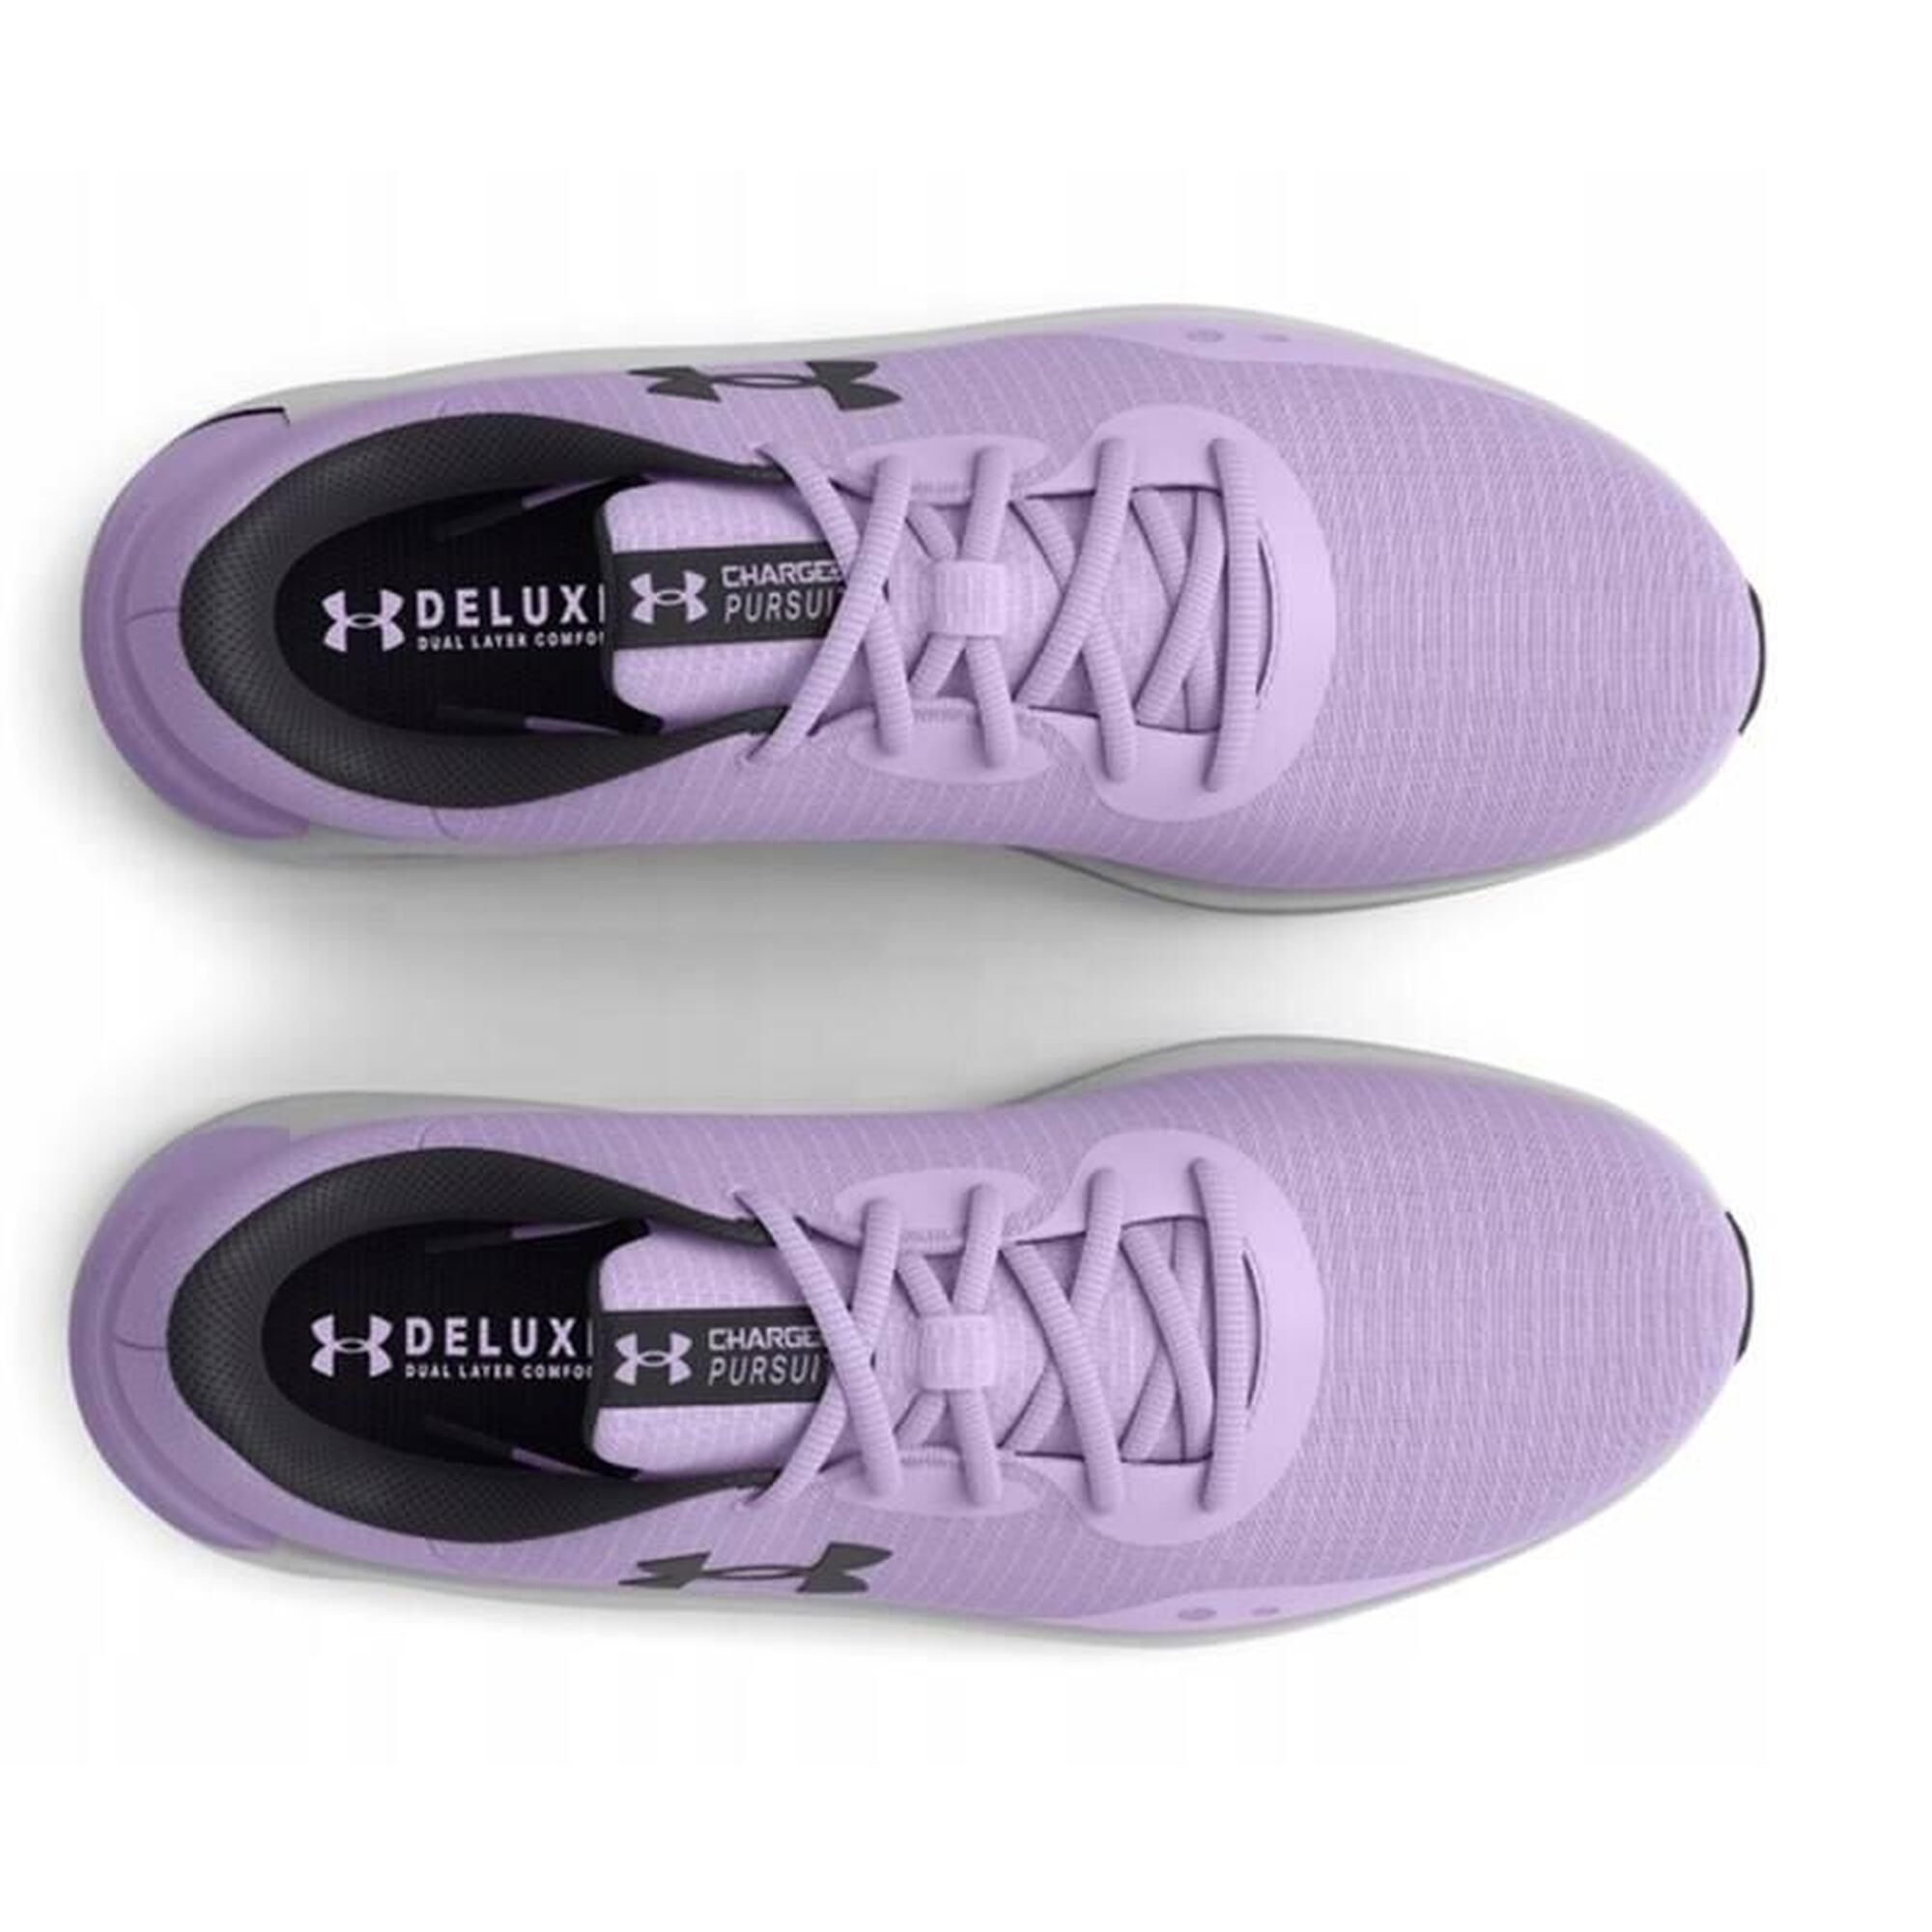 Buty do biegania damskie Under Armour Charged Pursuit Tech